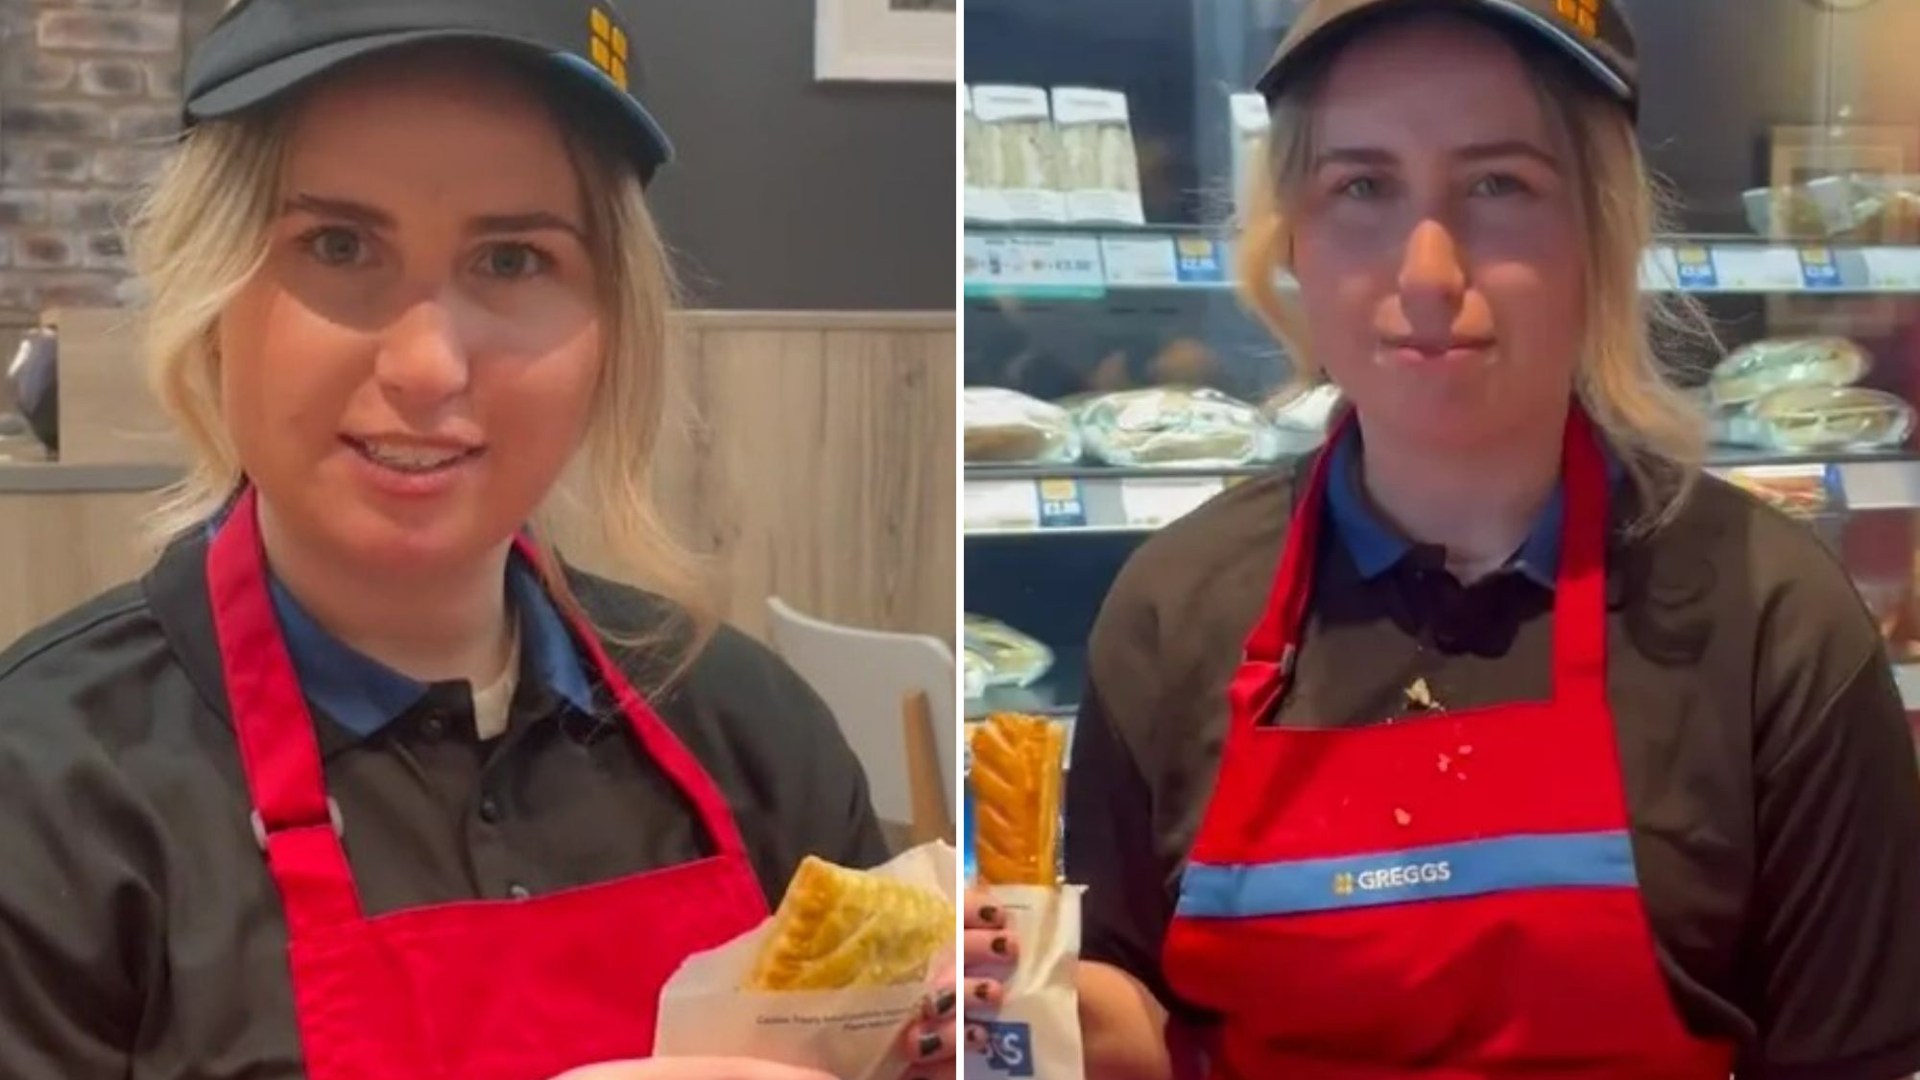 I work at Greggs – there’s so many perks including free coffee and steak bake lunches, but there’s a major downside too [Video]